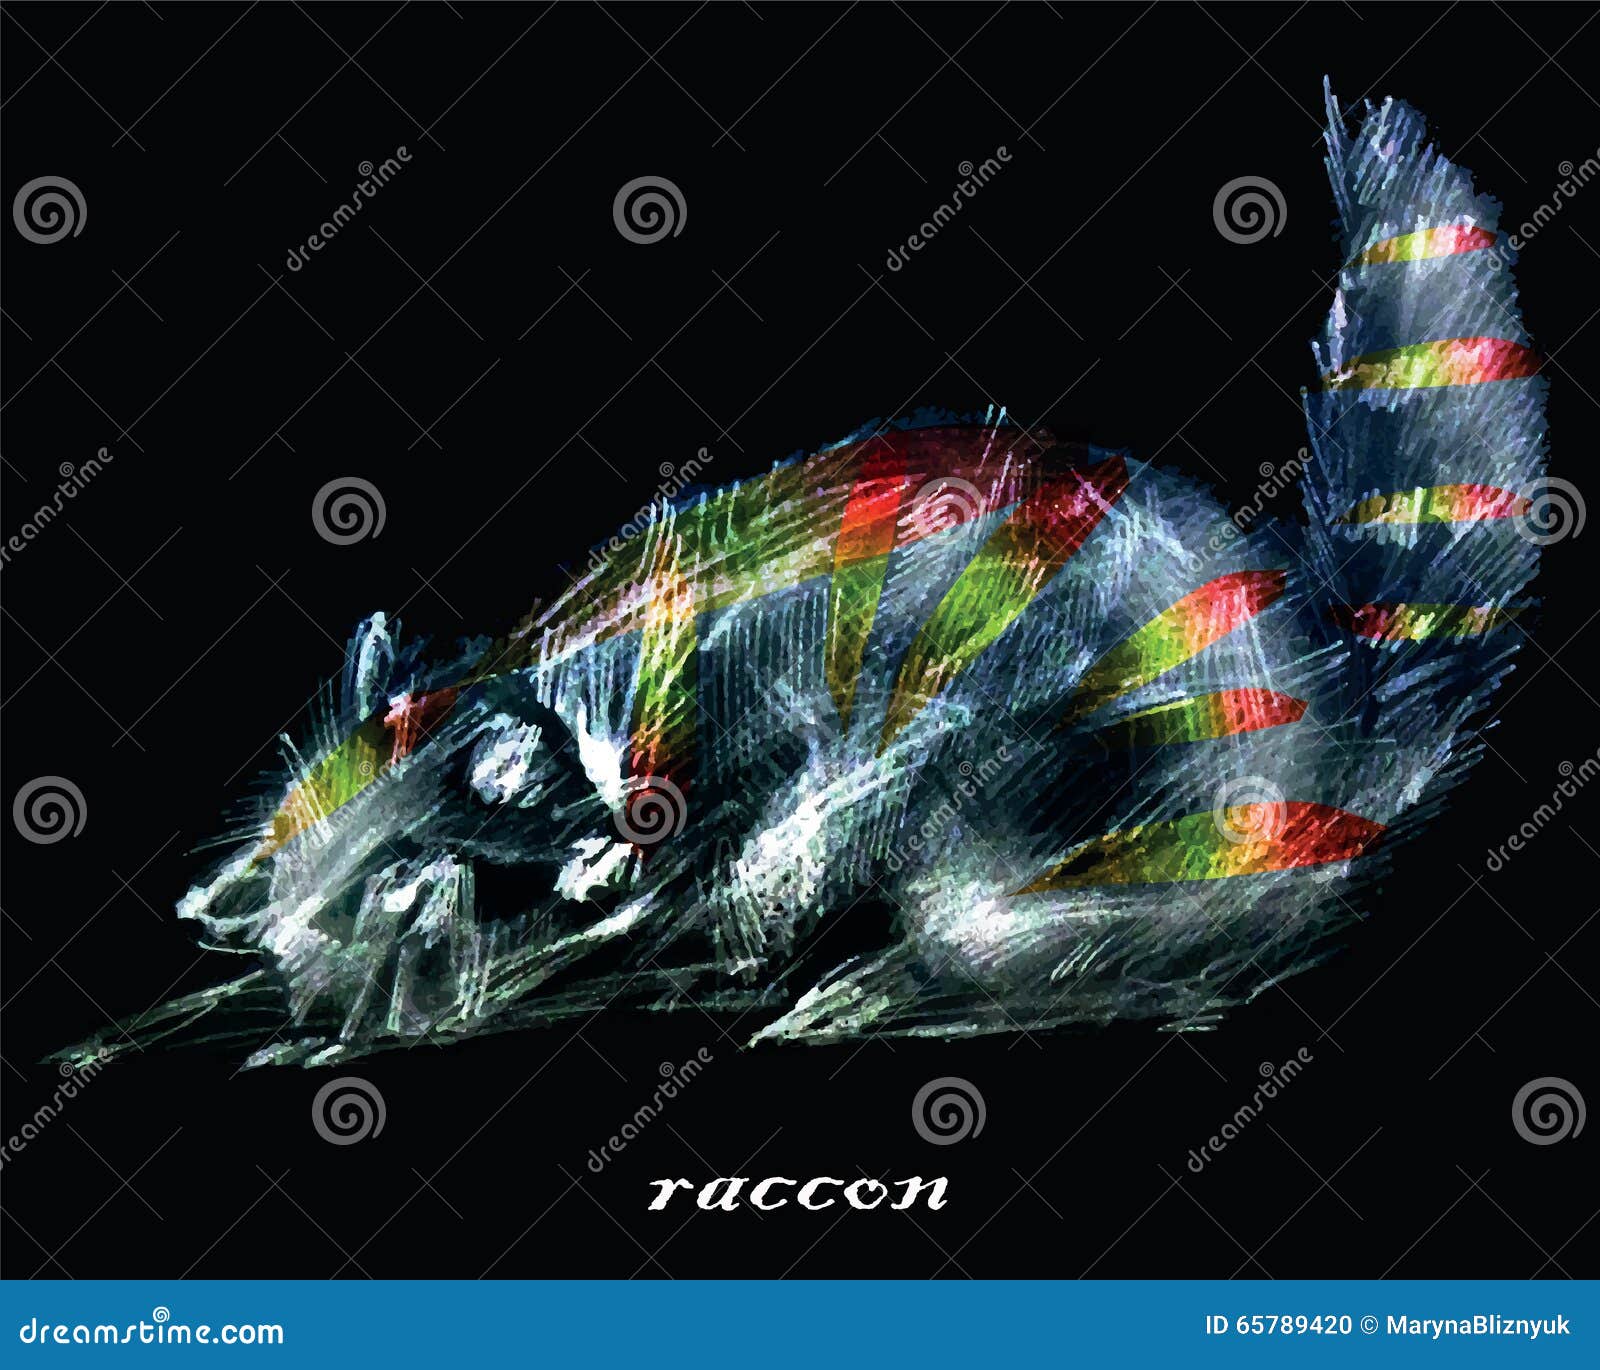  graphic stylized image of raccon